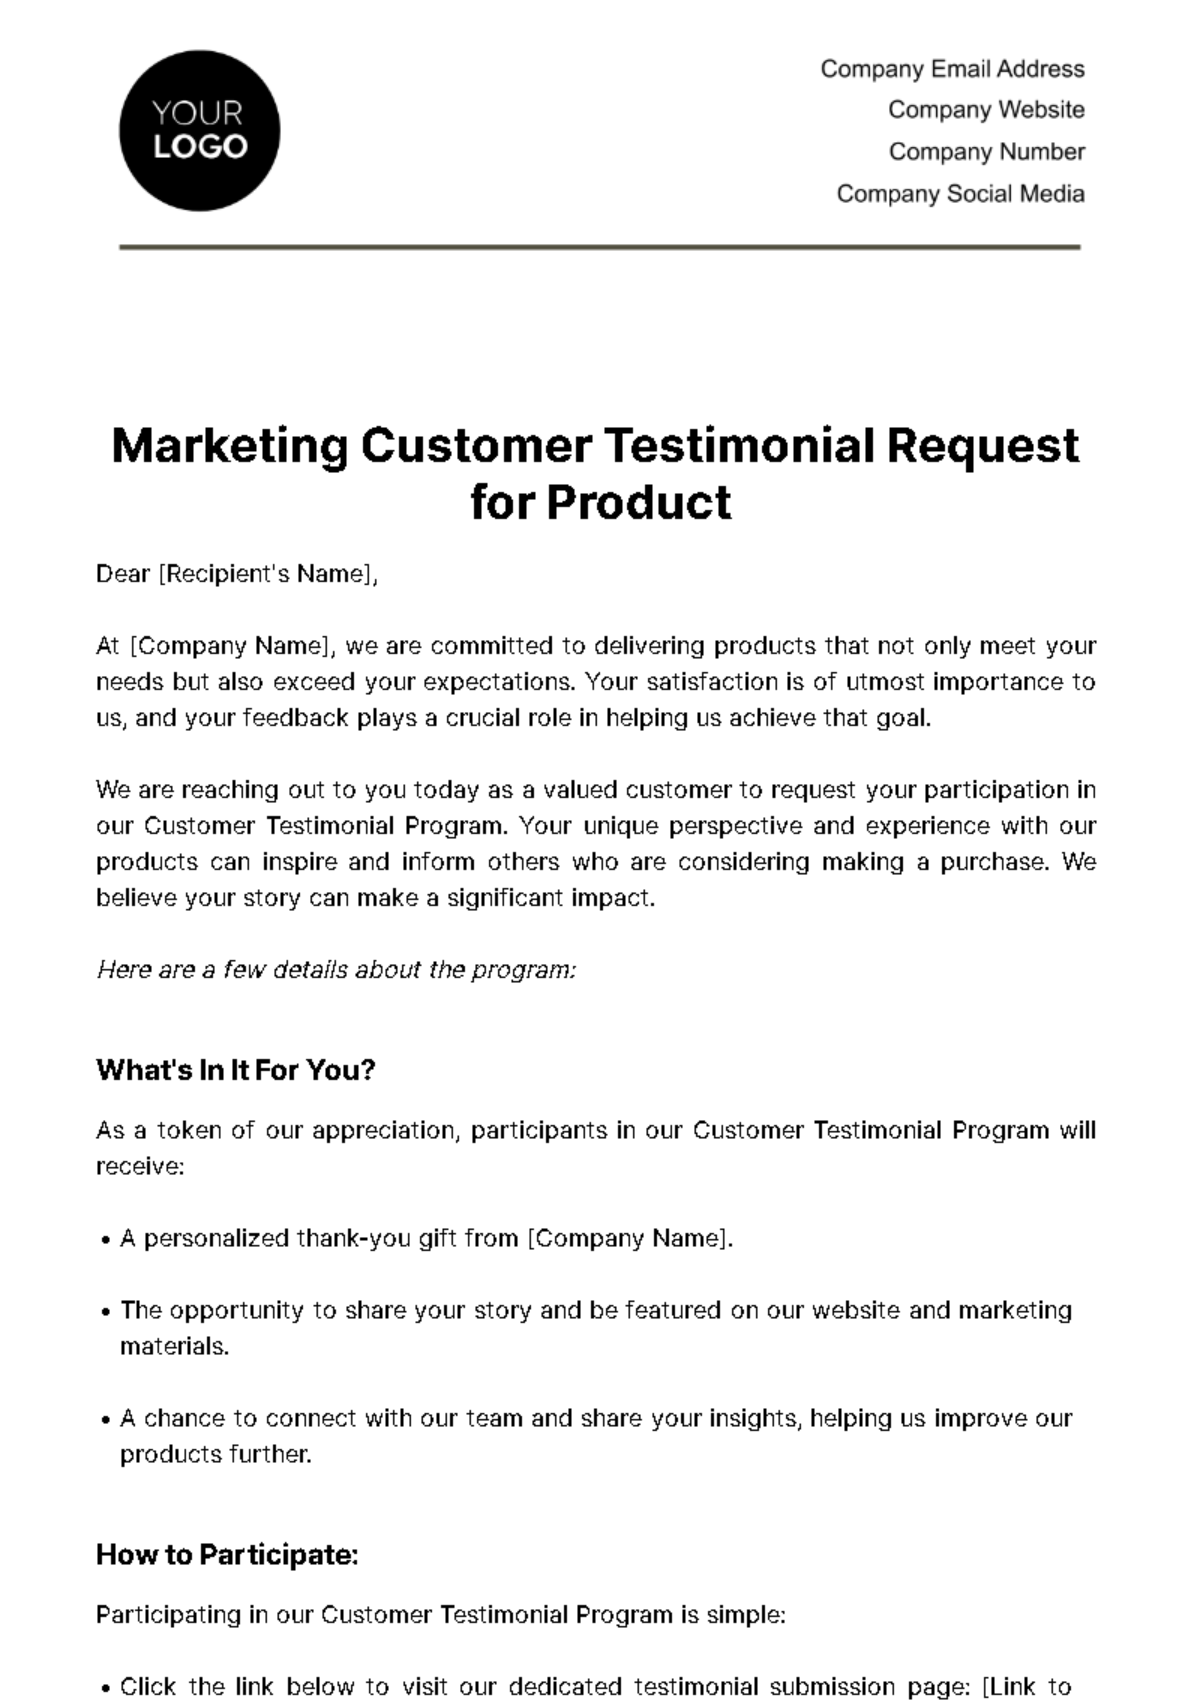 Marketing Customer Testimonial Request for Product Template